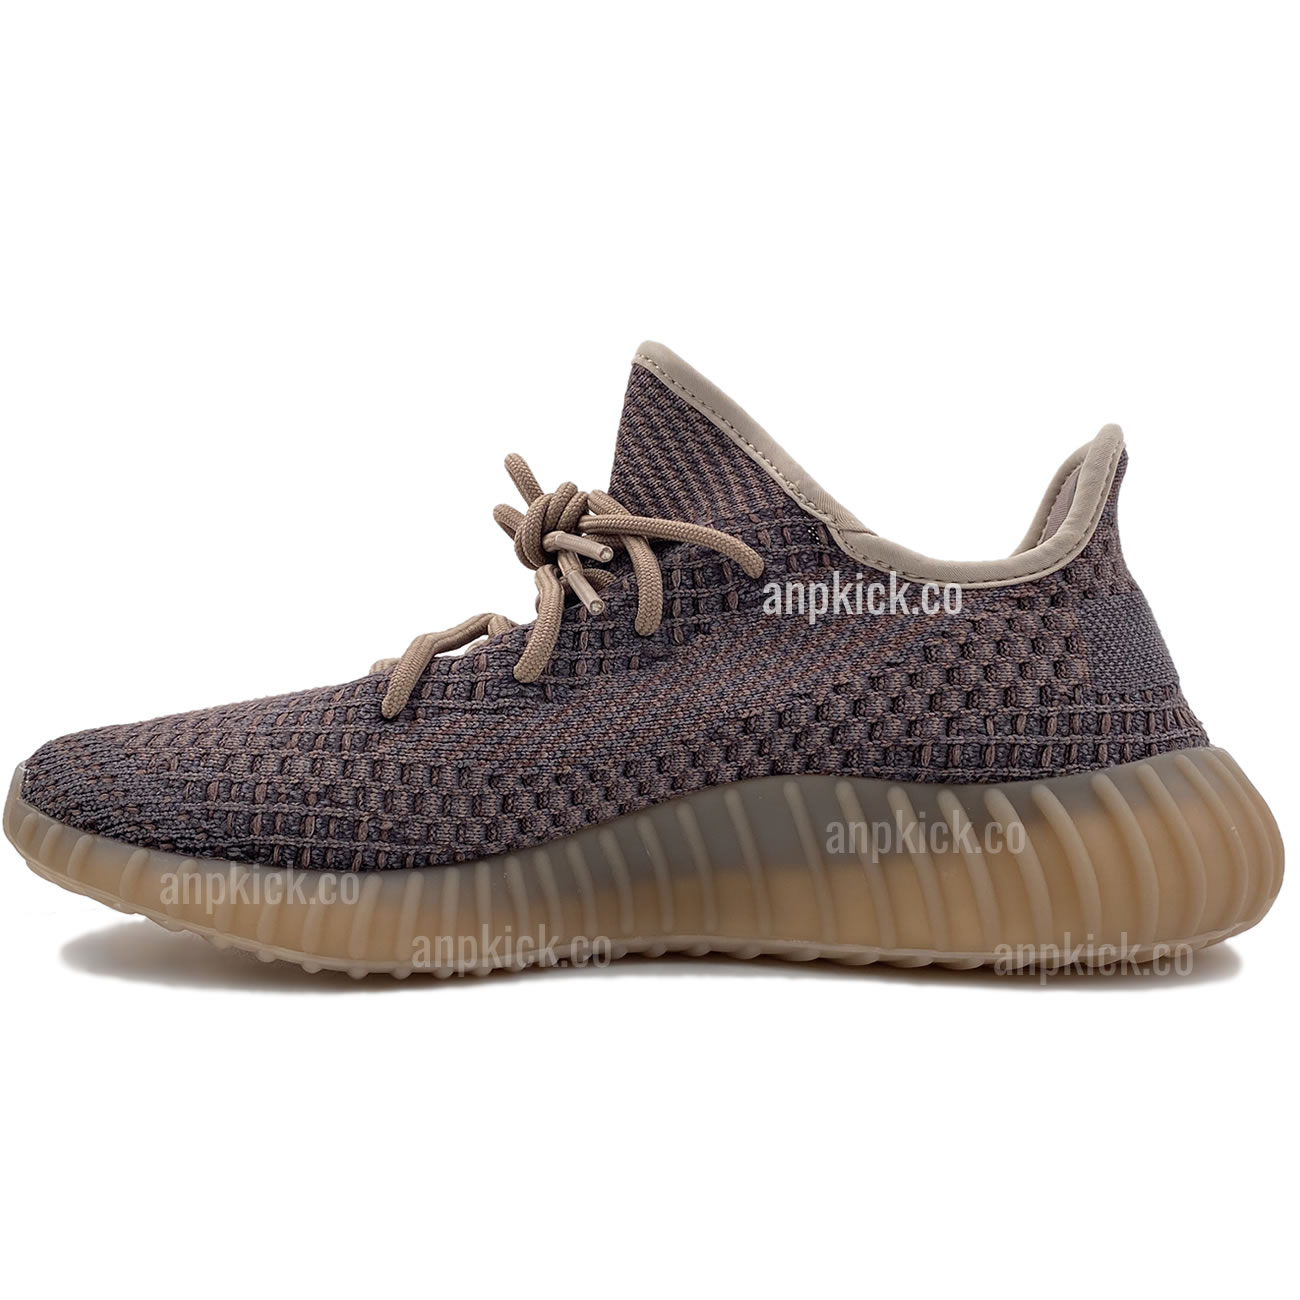 Adidas Yeezy Boost 350 V2 Yecher Ho2795 New Release Date First Look (3) - newkick.org